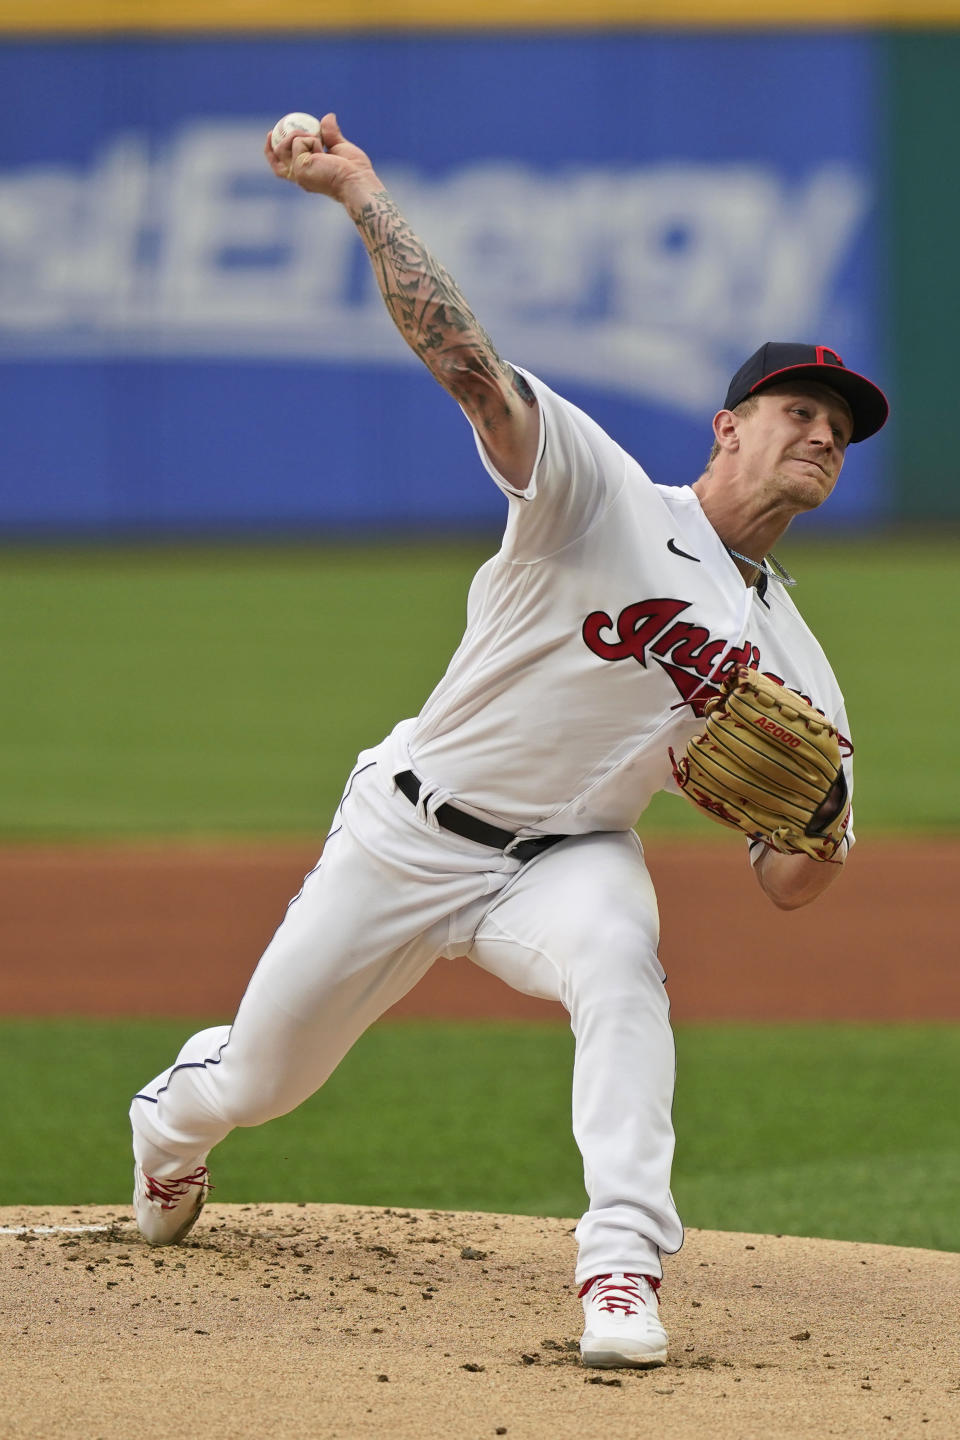 Cleveland Indians starting pitcher Zach Plesac delivers during the first inning of the team's baseball game against the Detroit Tigers, Friday, April 9, 2021, in Cleveland. (AP Photo/Tony Dejak)